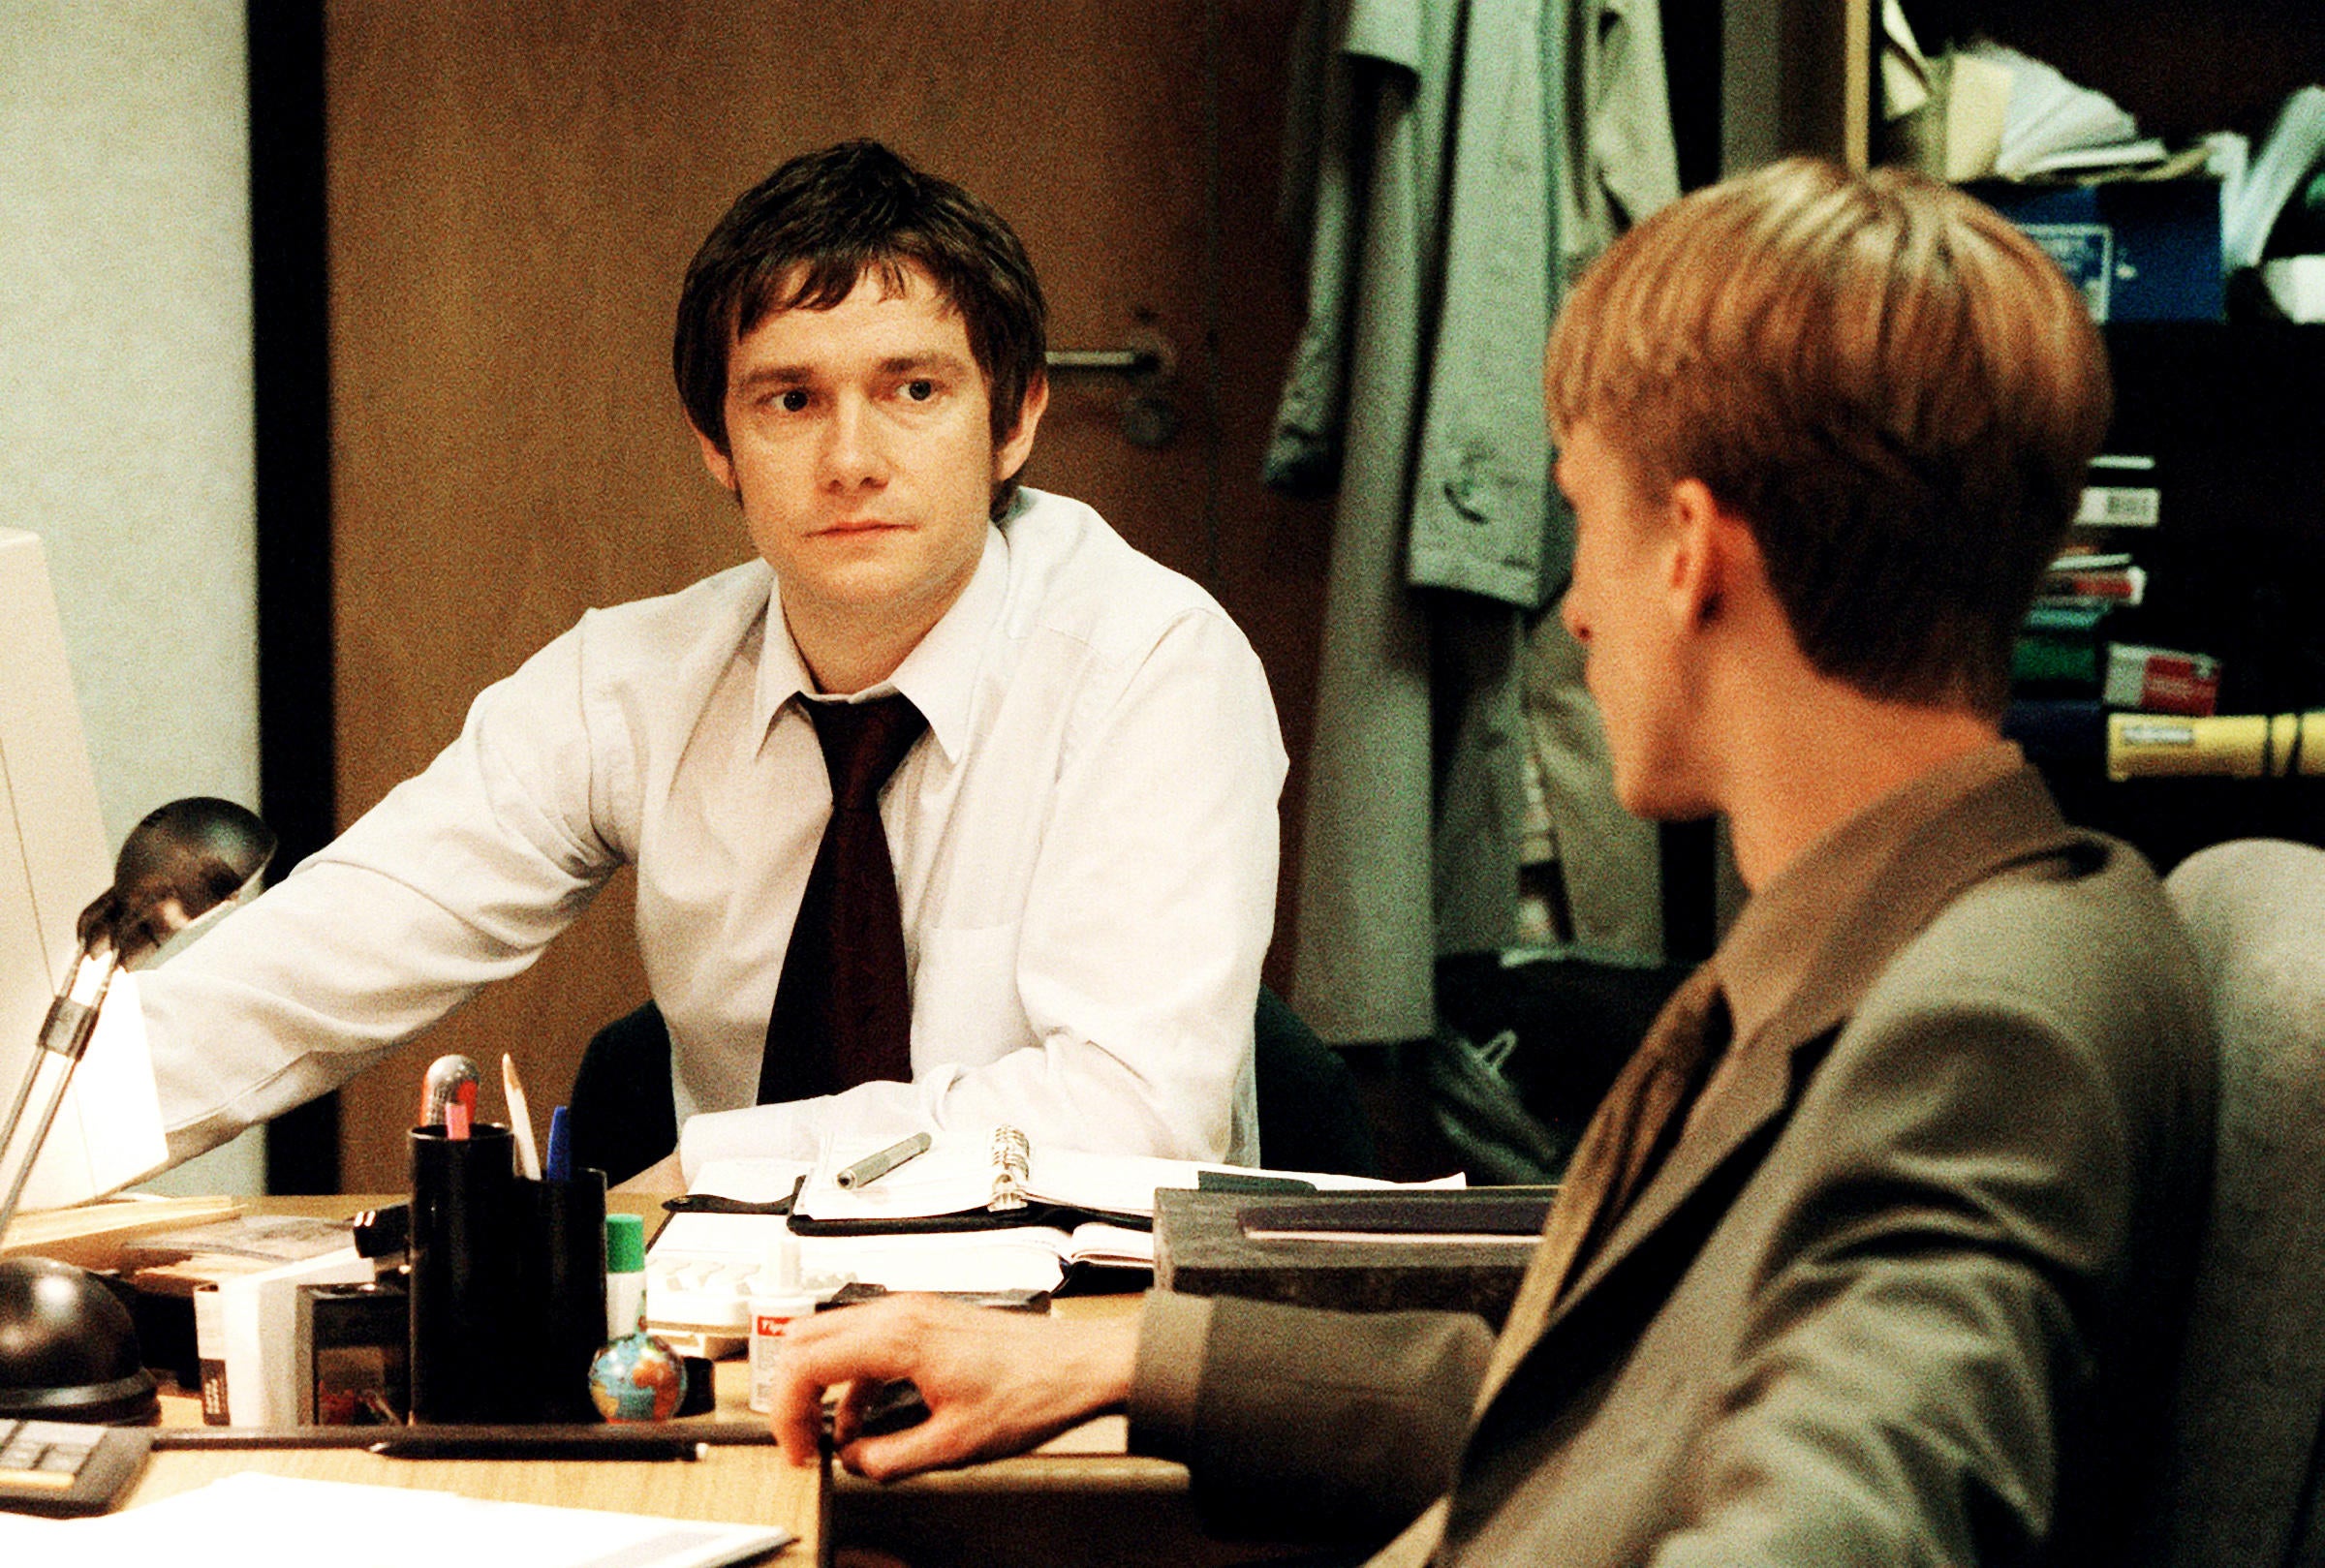 Bored stiff: Martin Freeman’s Tim – a cultural embodiment of workplace apathy – in the seminal comedy ‘The Office’